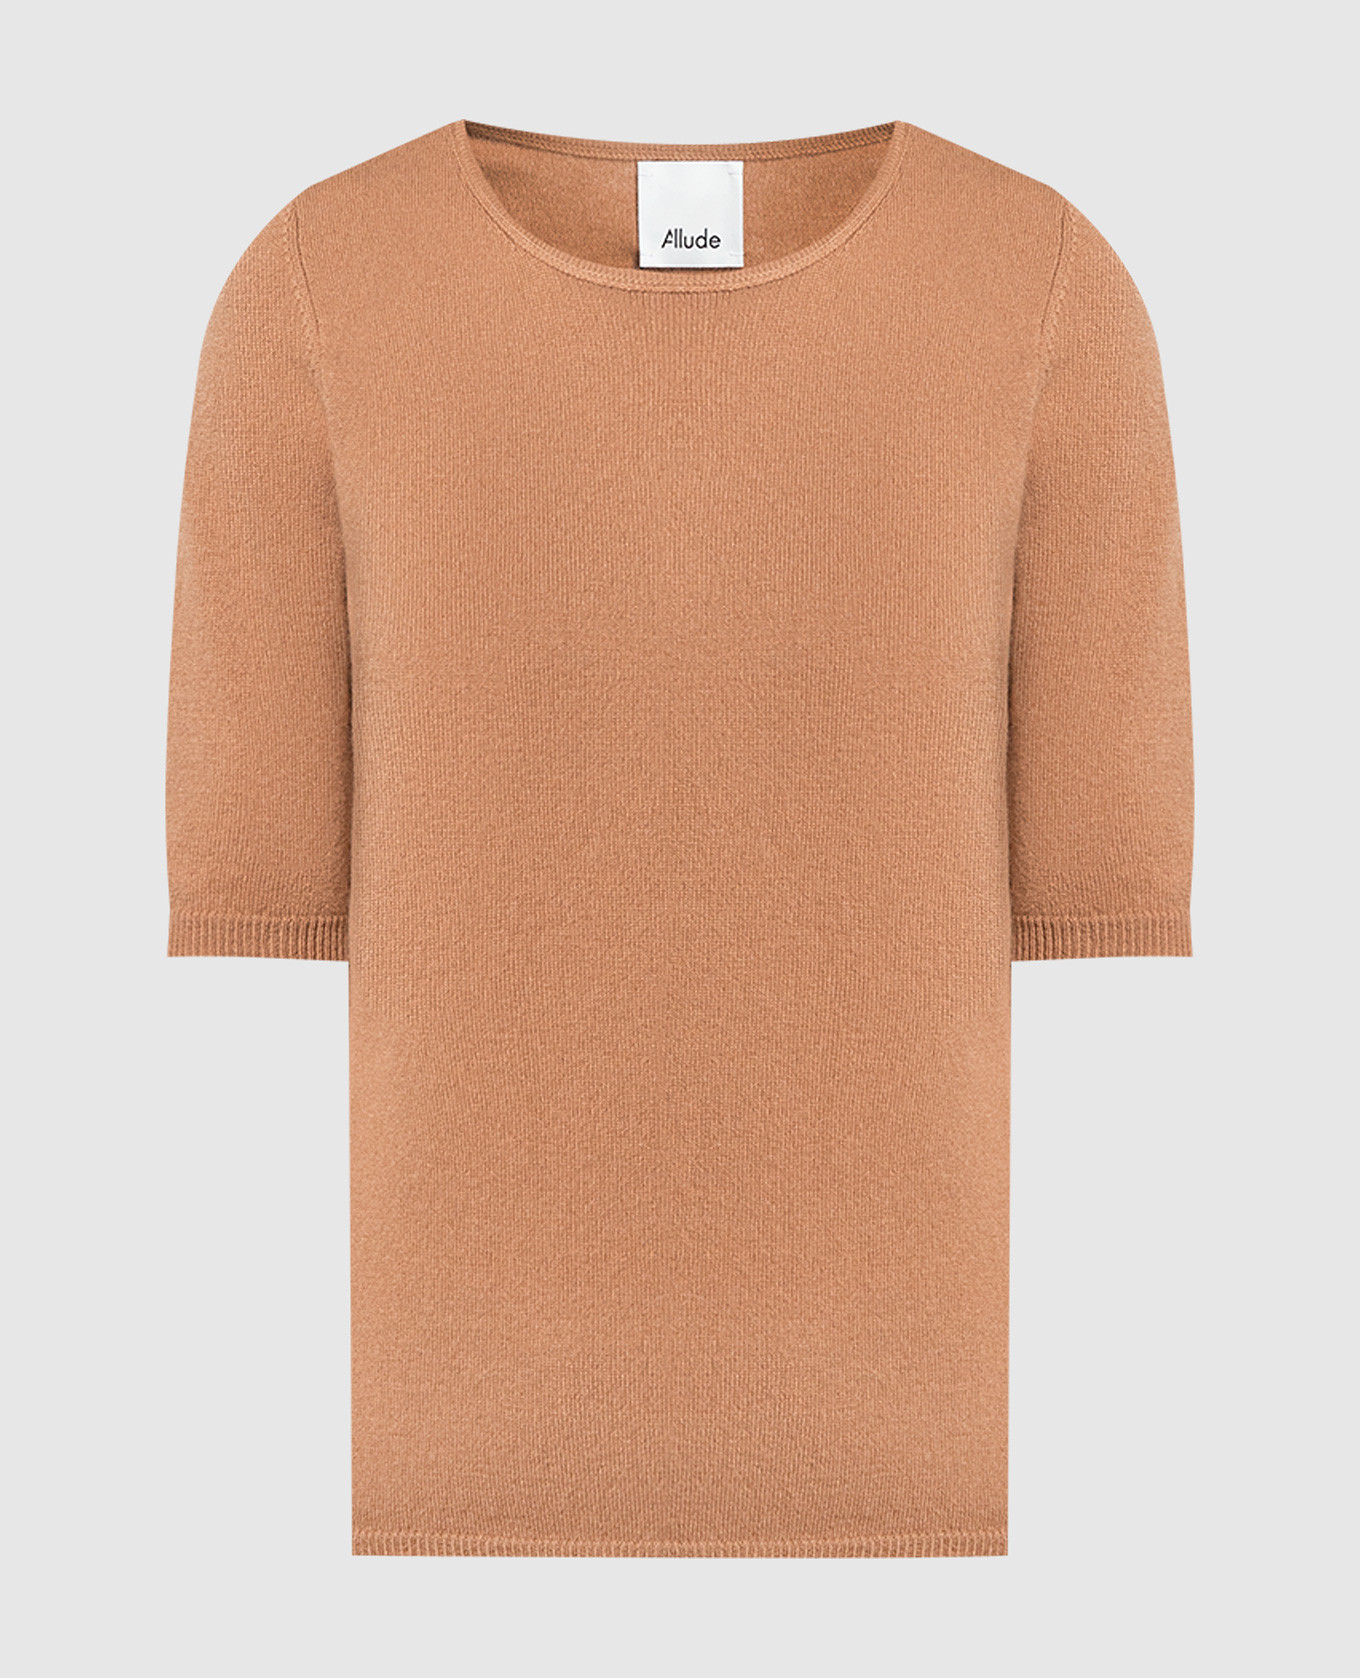 Brown wool and cashmere jumper